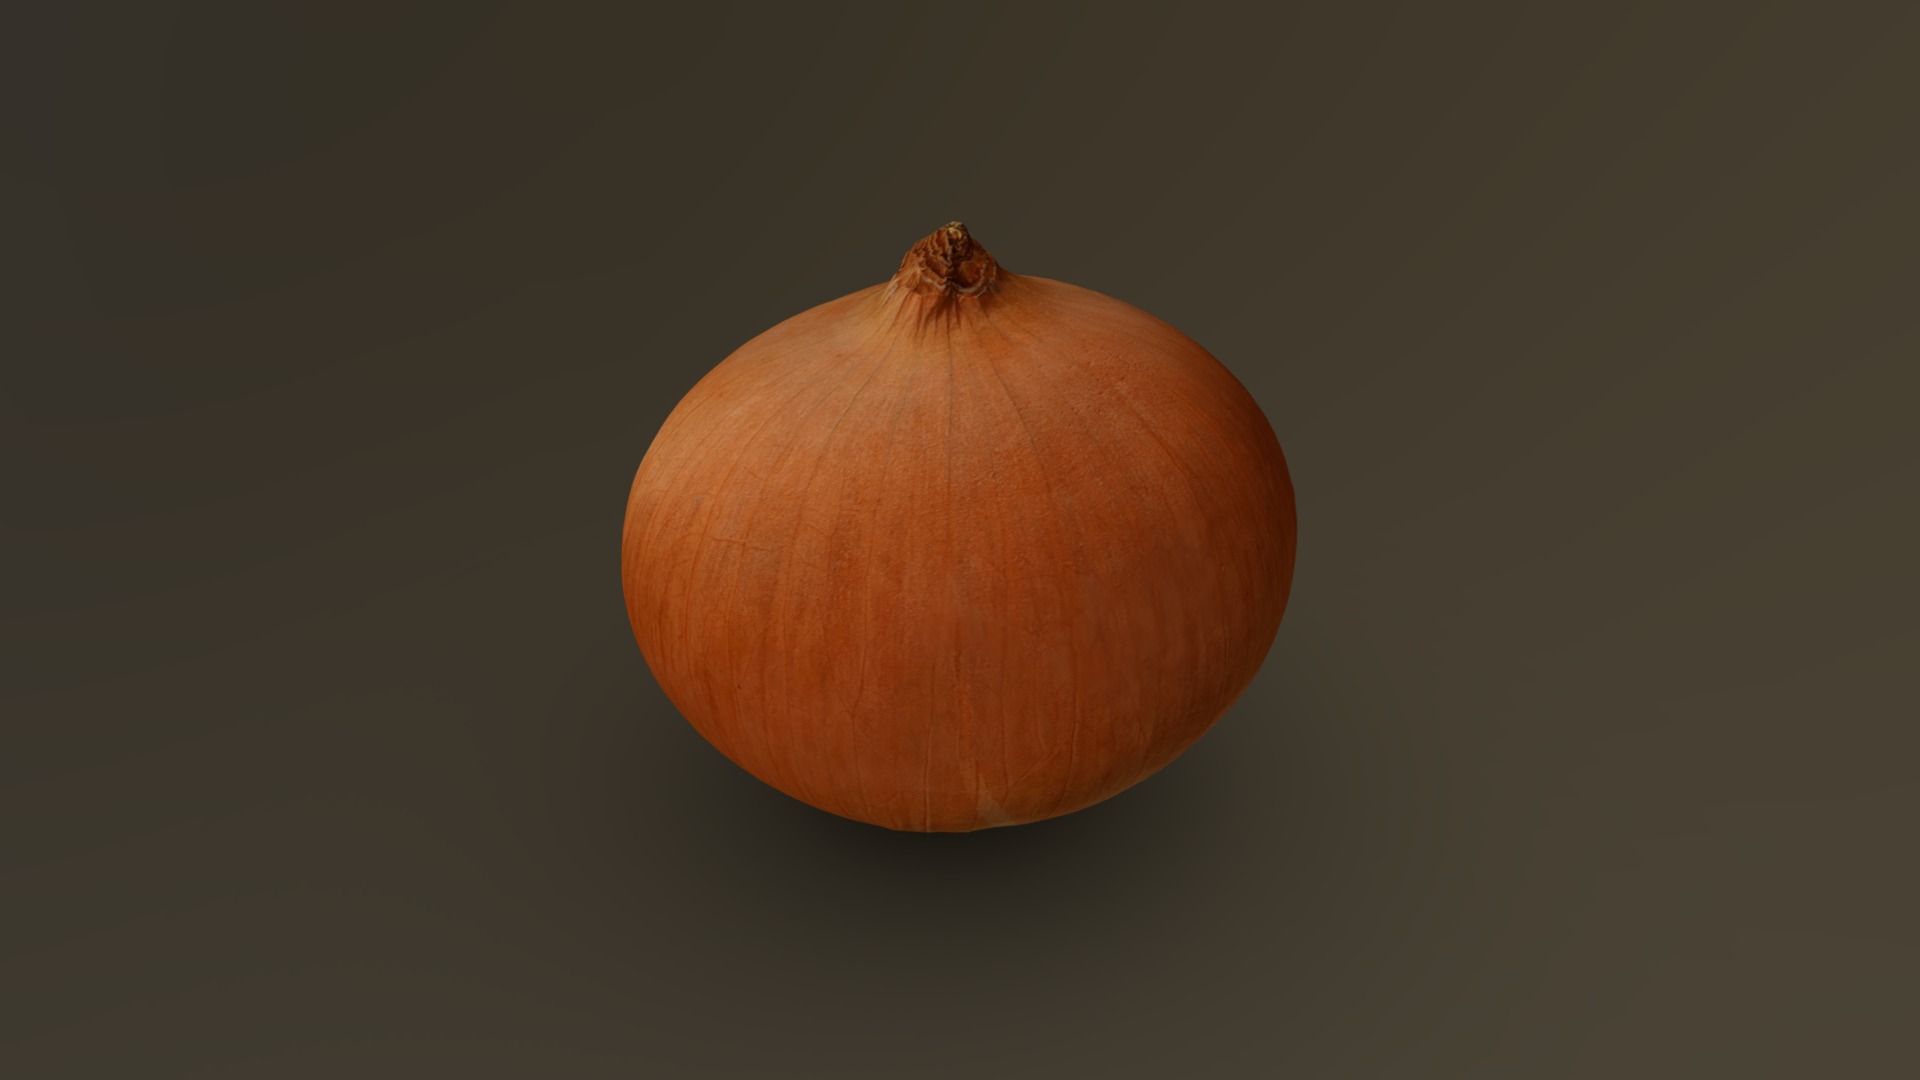 3D model Onion 03 - This is a 3D model of the Onion 03. The 3D model is about a round orange fruit.